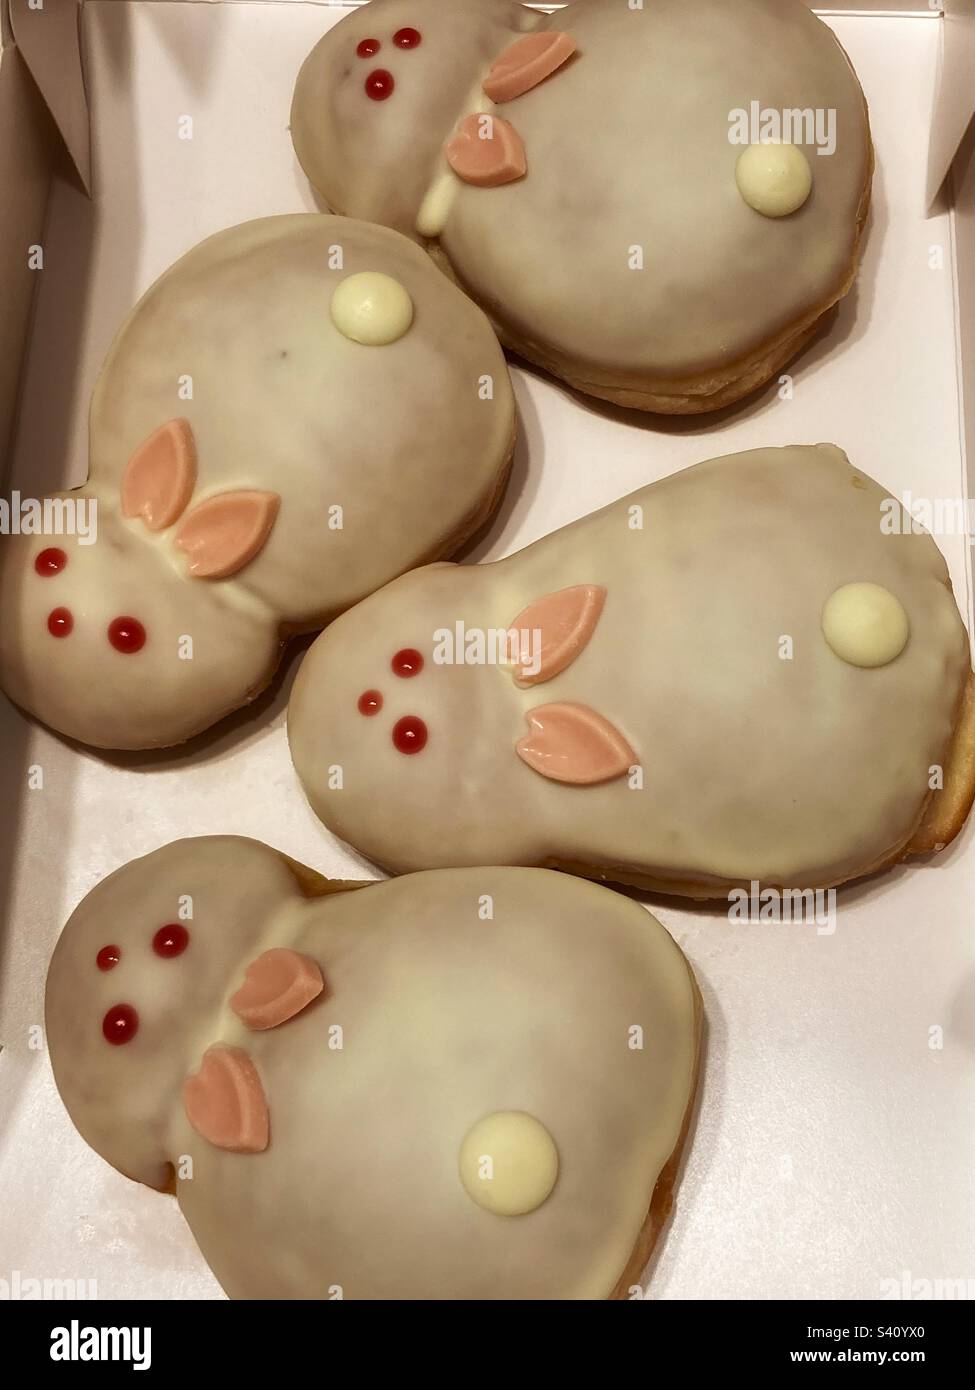 Rabbit shaped donuts by Krispy Kreme in Japan to celebrate the year of the rabbit 2023 Stock Photo